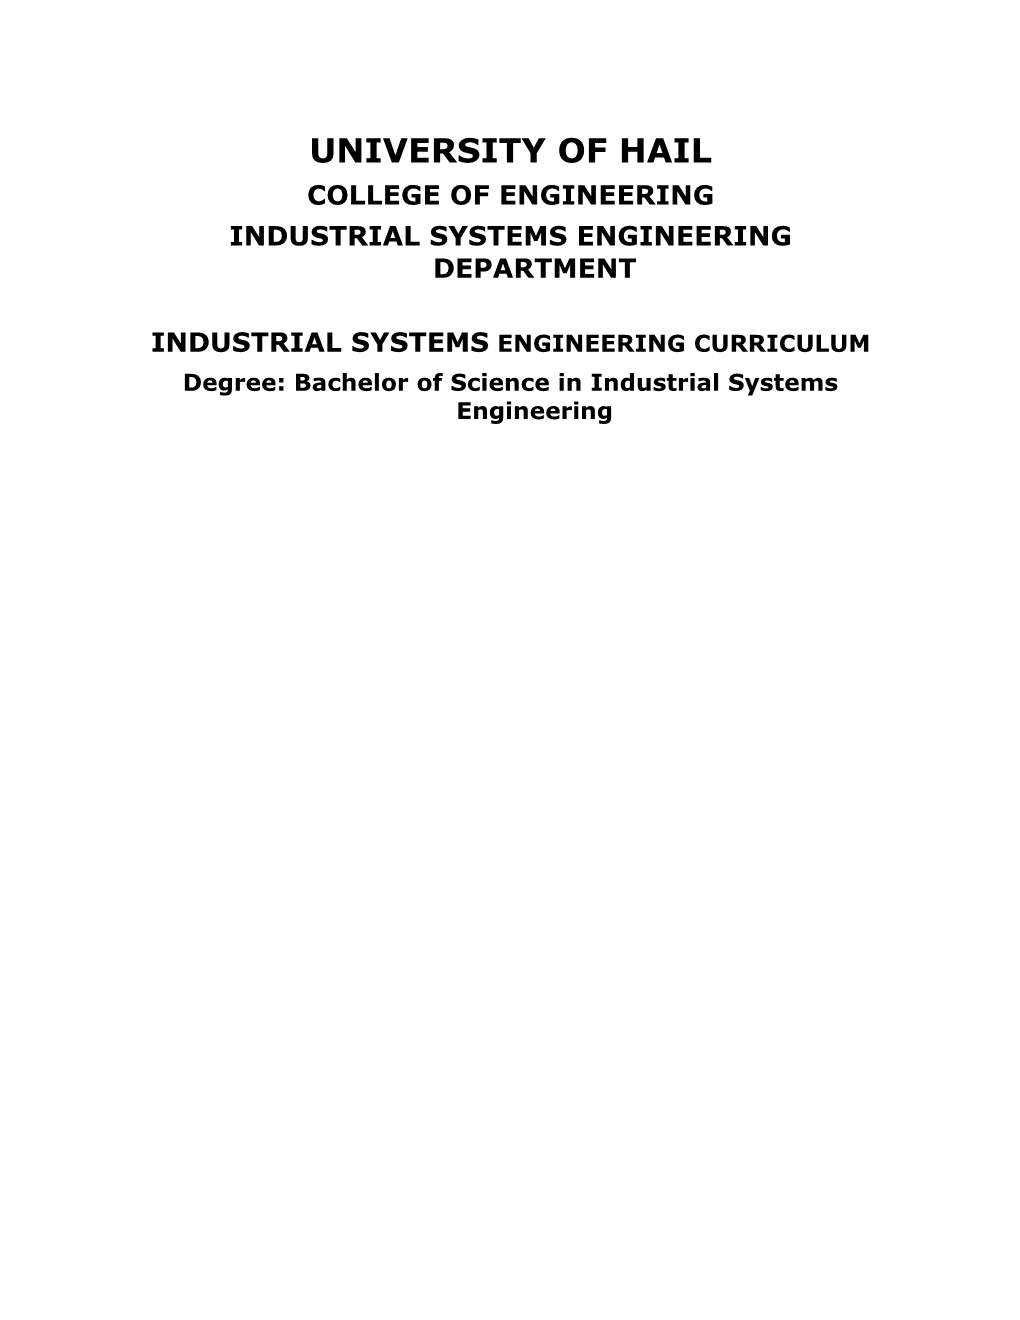 Industrial Systems Engineering Department